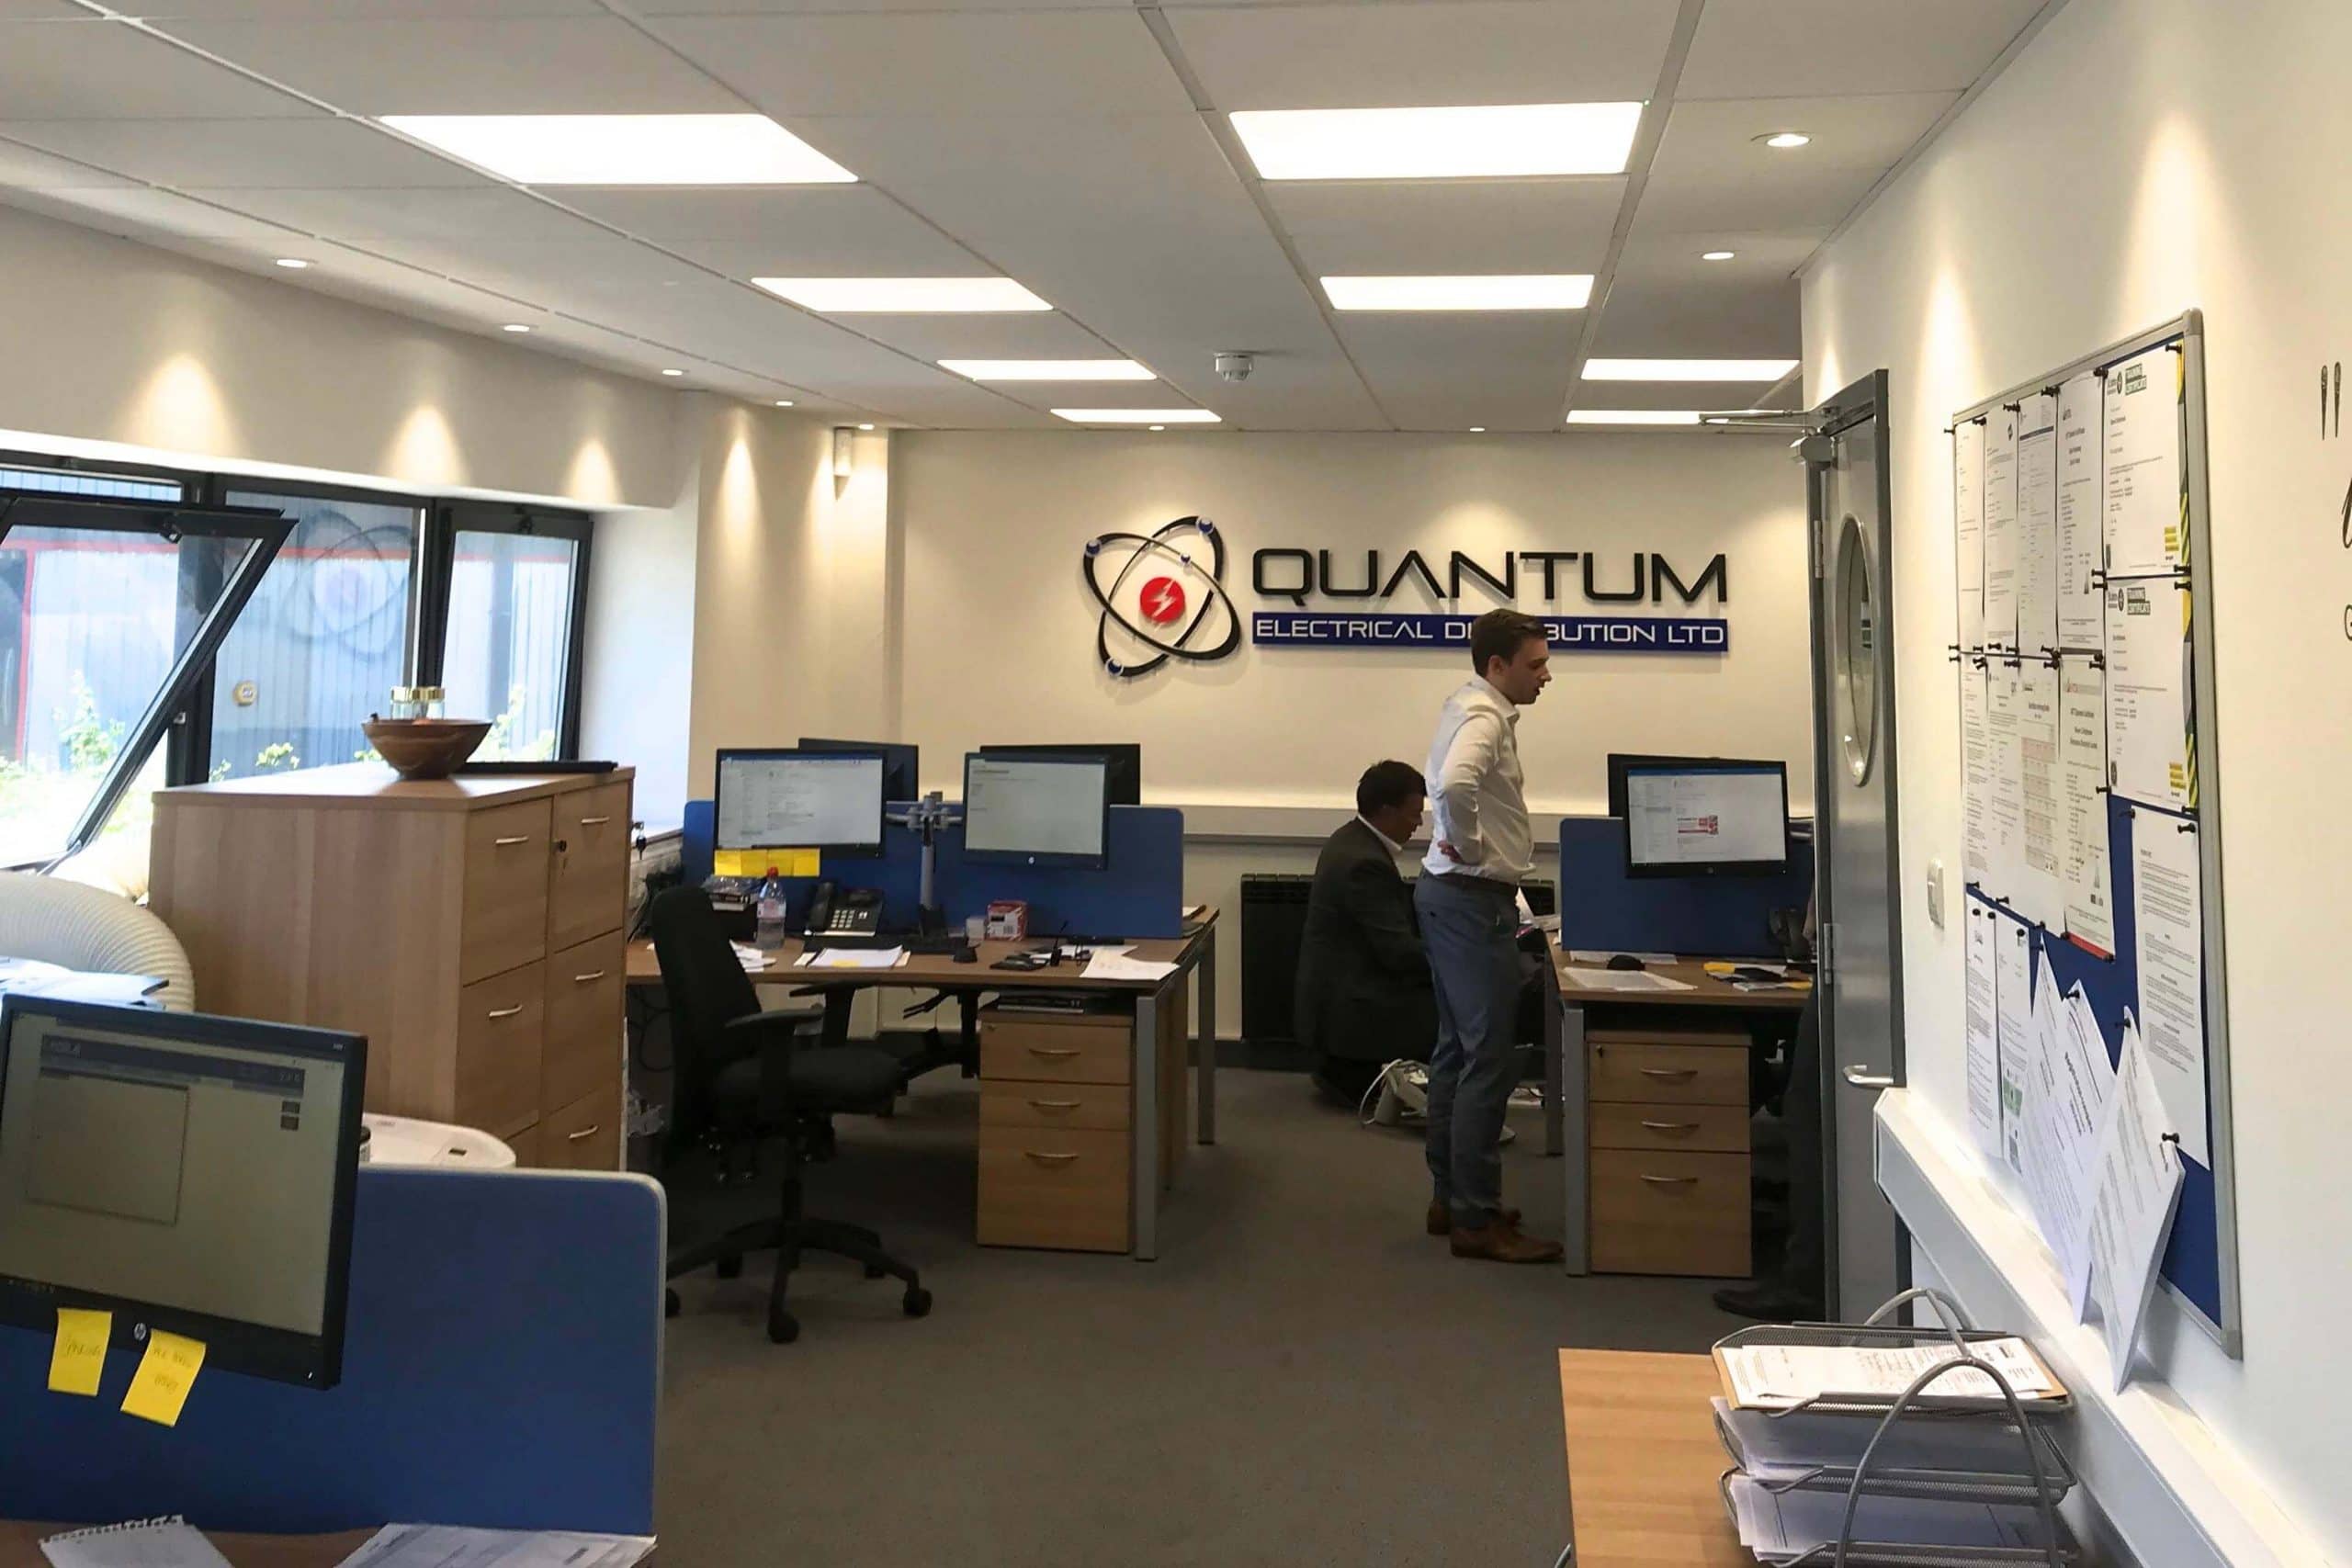 Commercial air conditioning in Quantum Chichester offices